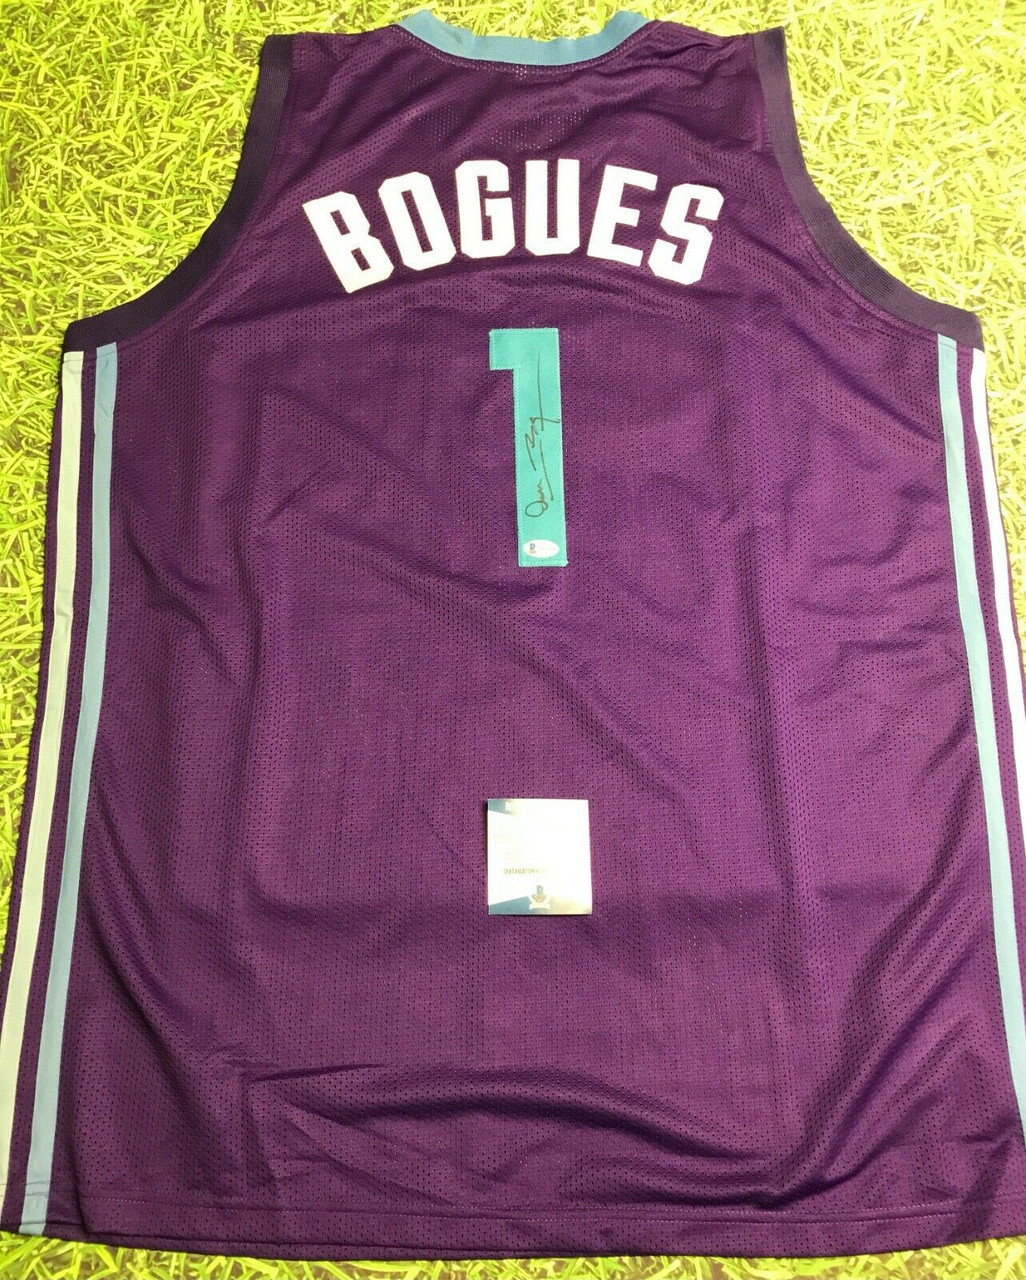 Dominique Wilkins Signed Jersey (Beckett)